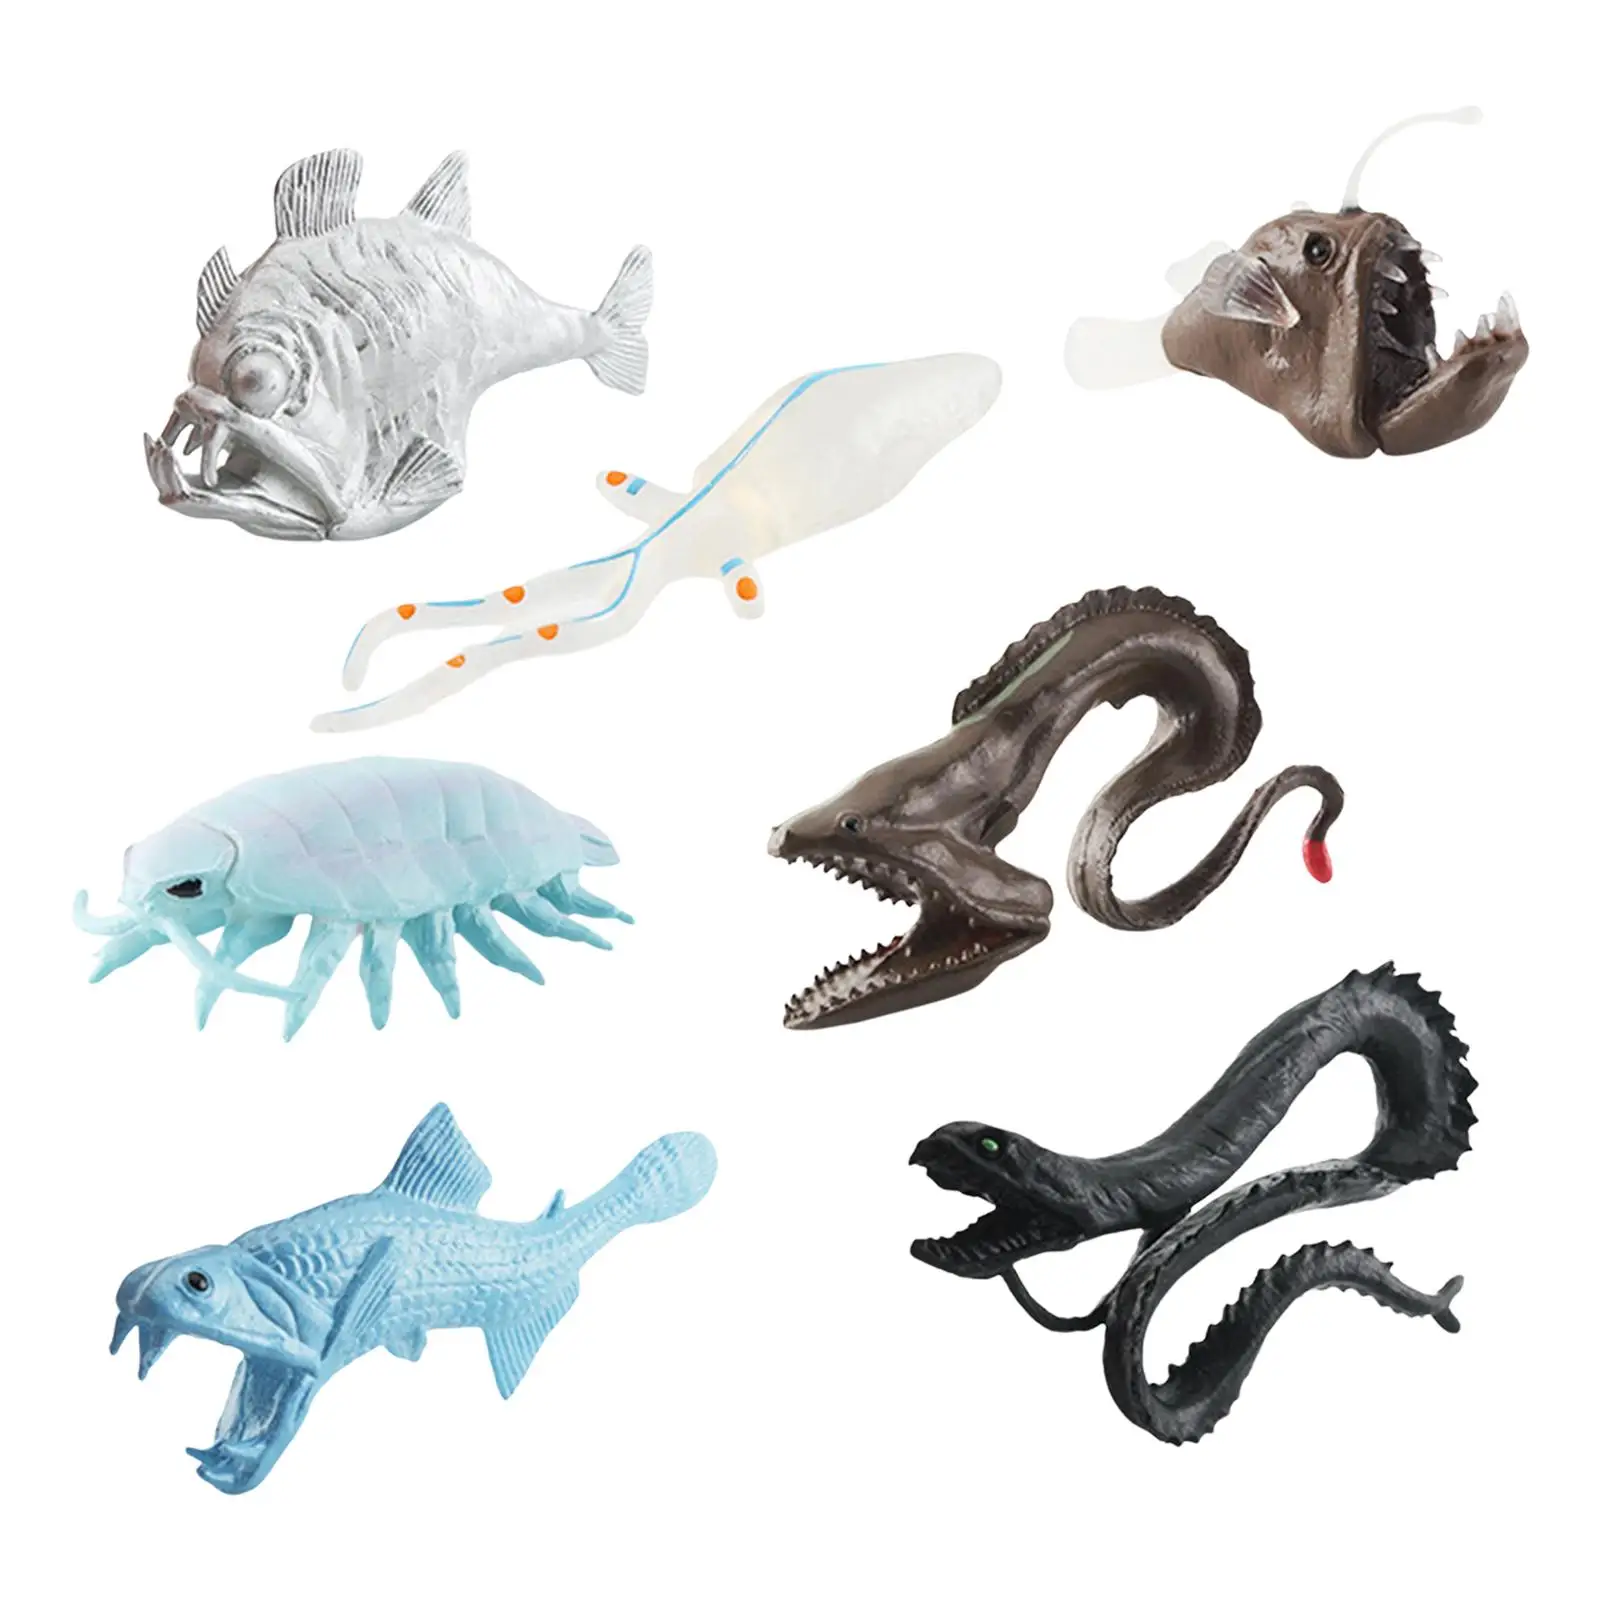 7Pcs Hand Painted Sea Biology Animal Figure Cake Toppers Ornaments Realistic Detailed Action Figures for Toddlers Kids